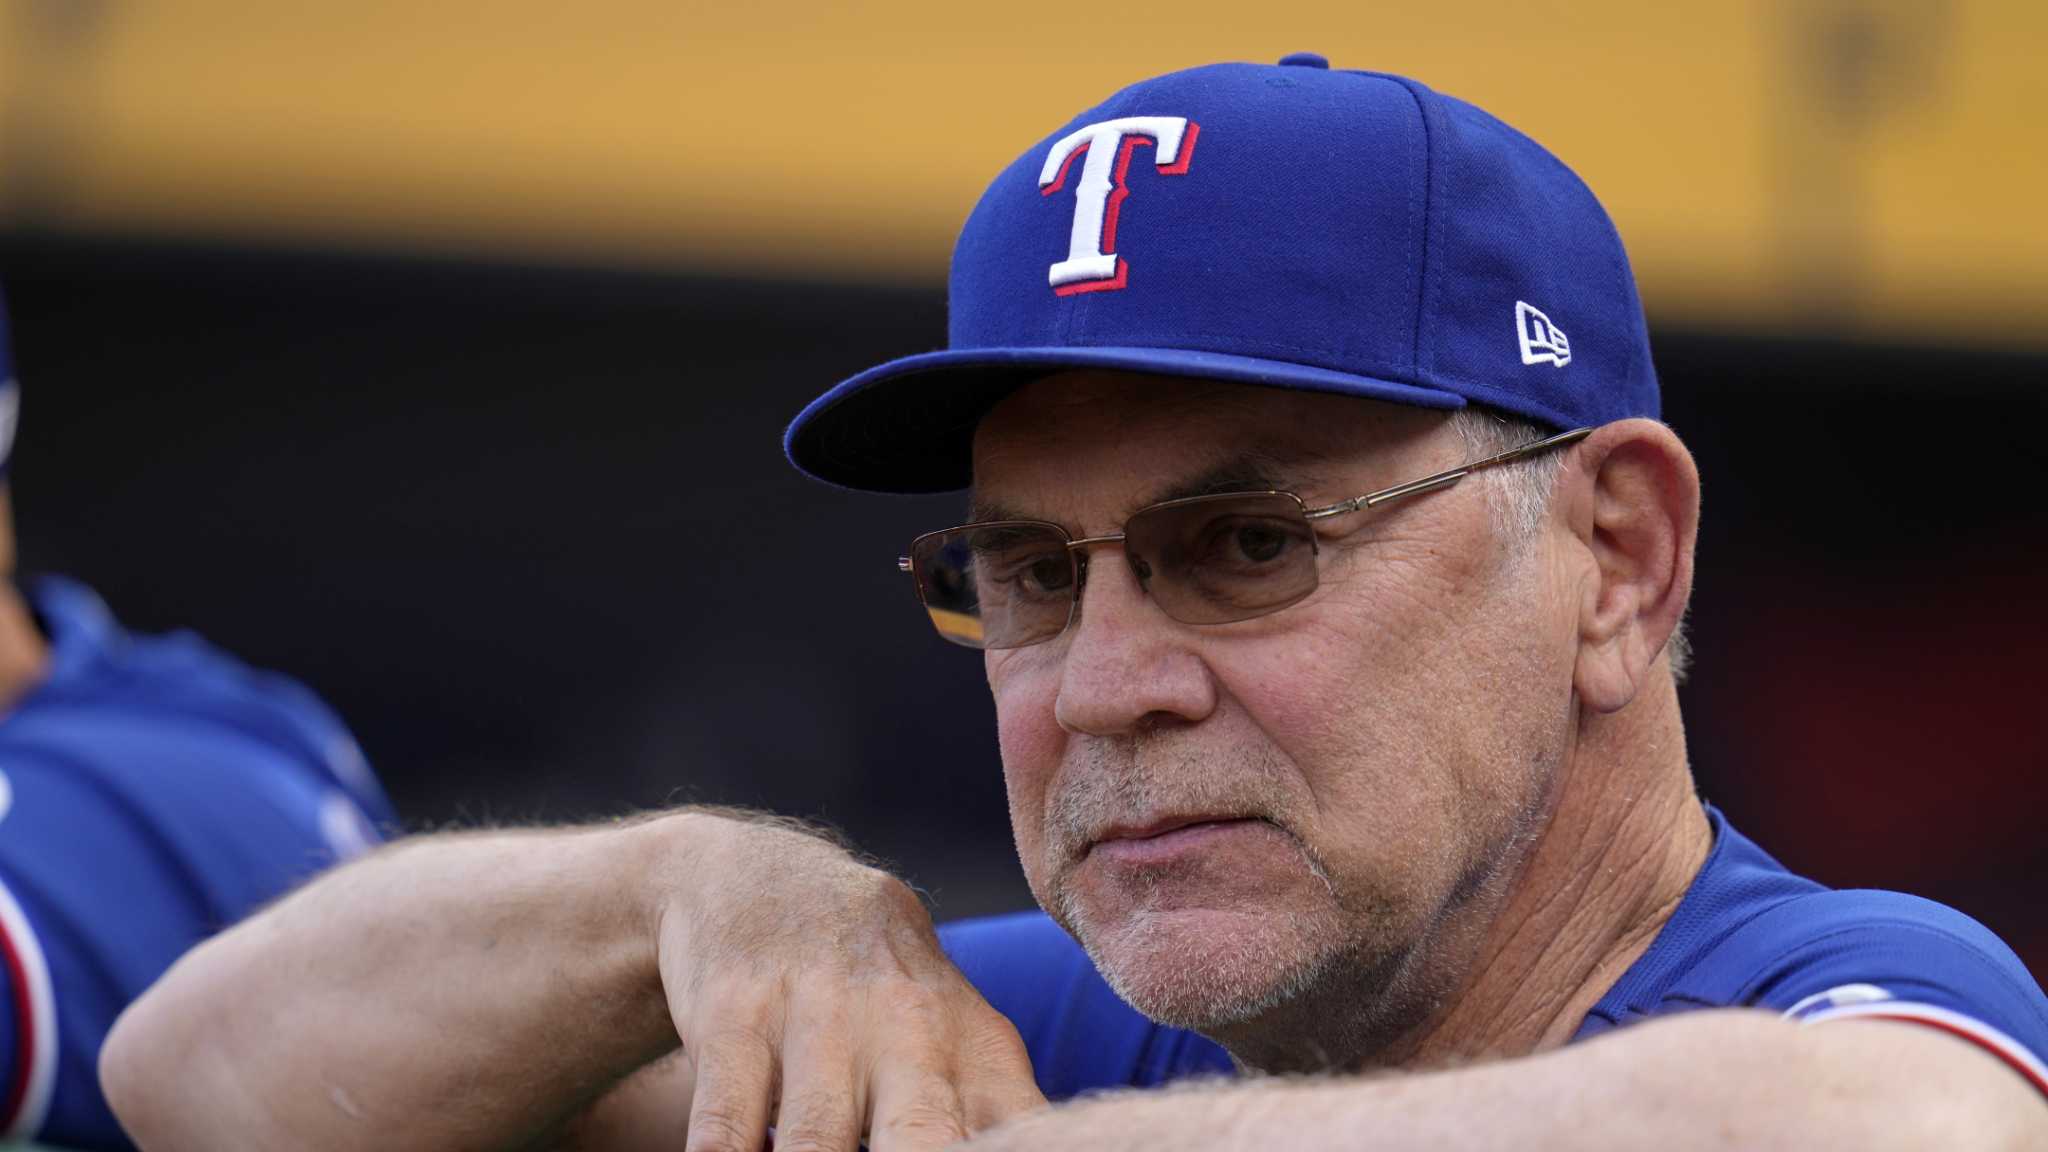 Bochy has Rangers off to best start ever, Sports